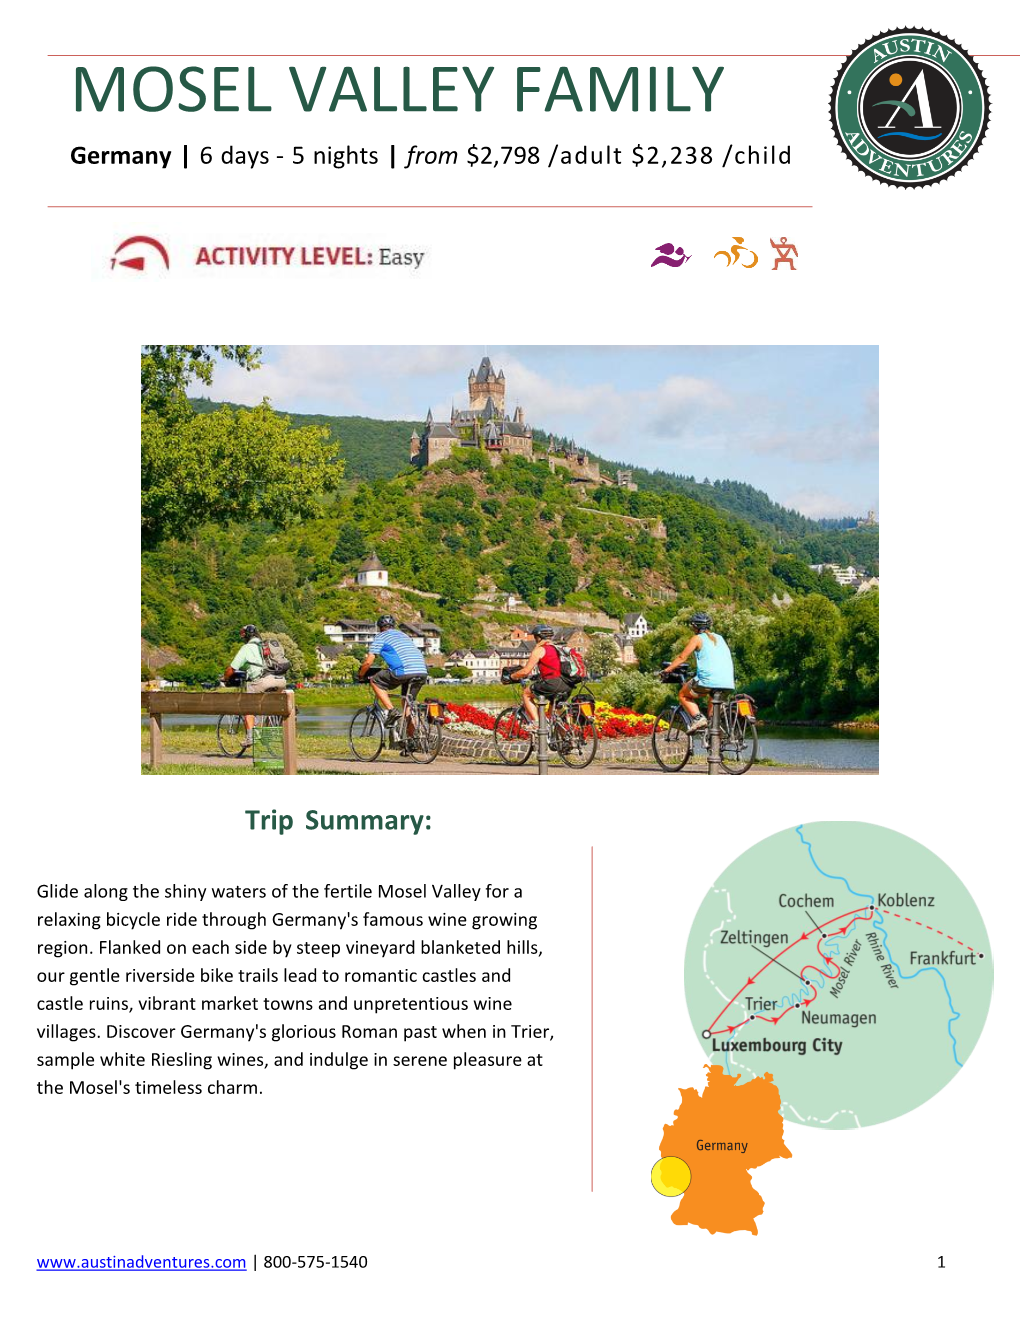 MOSEL VALLEY FAMILY Germany | 6 Days - 5 Nights | from $2,798 /Adult $2,238 /Child